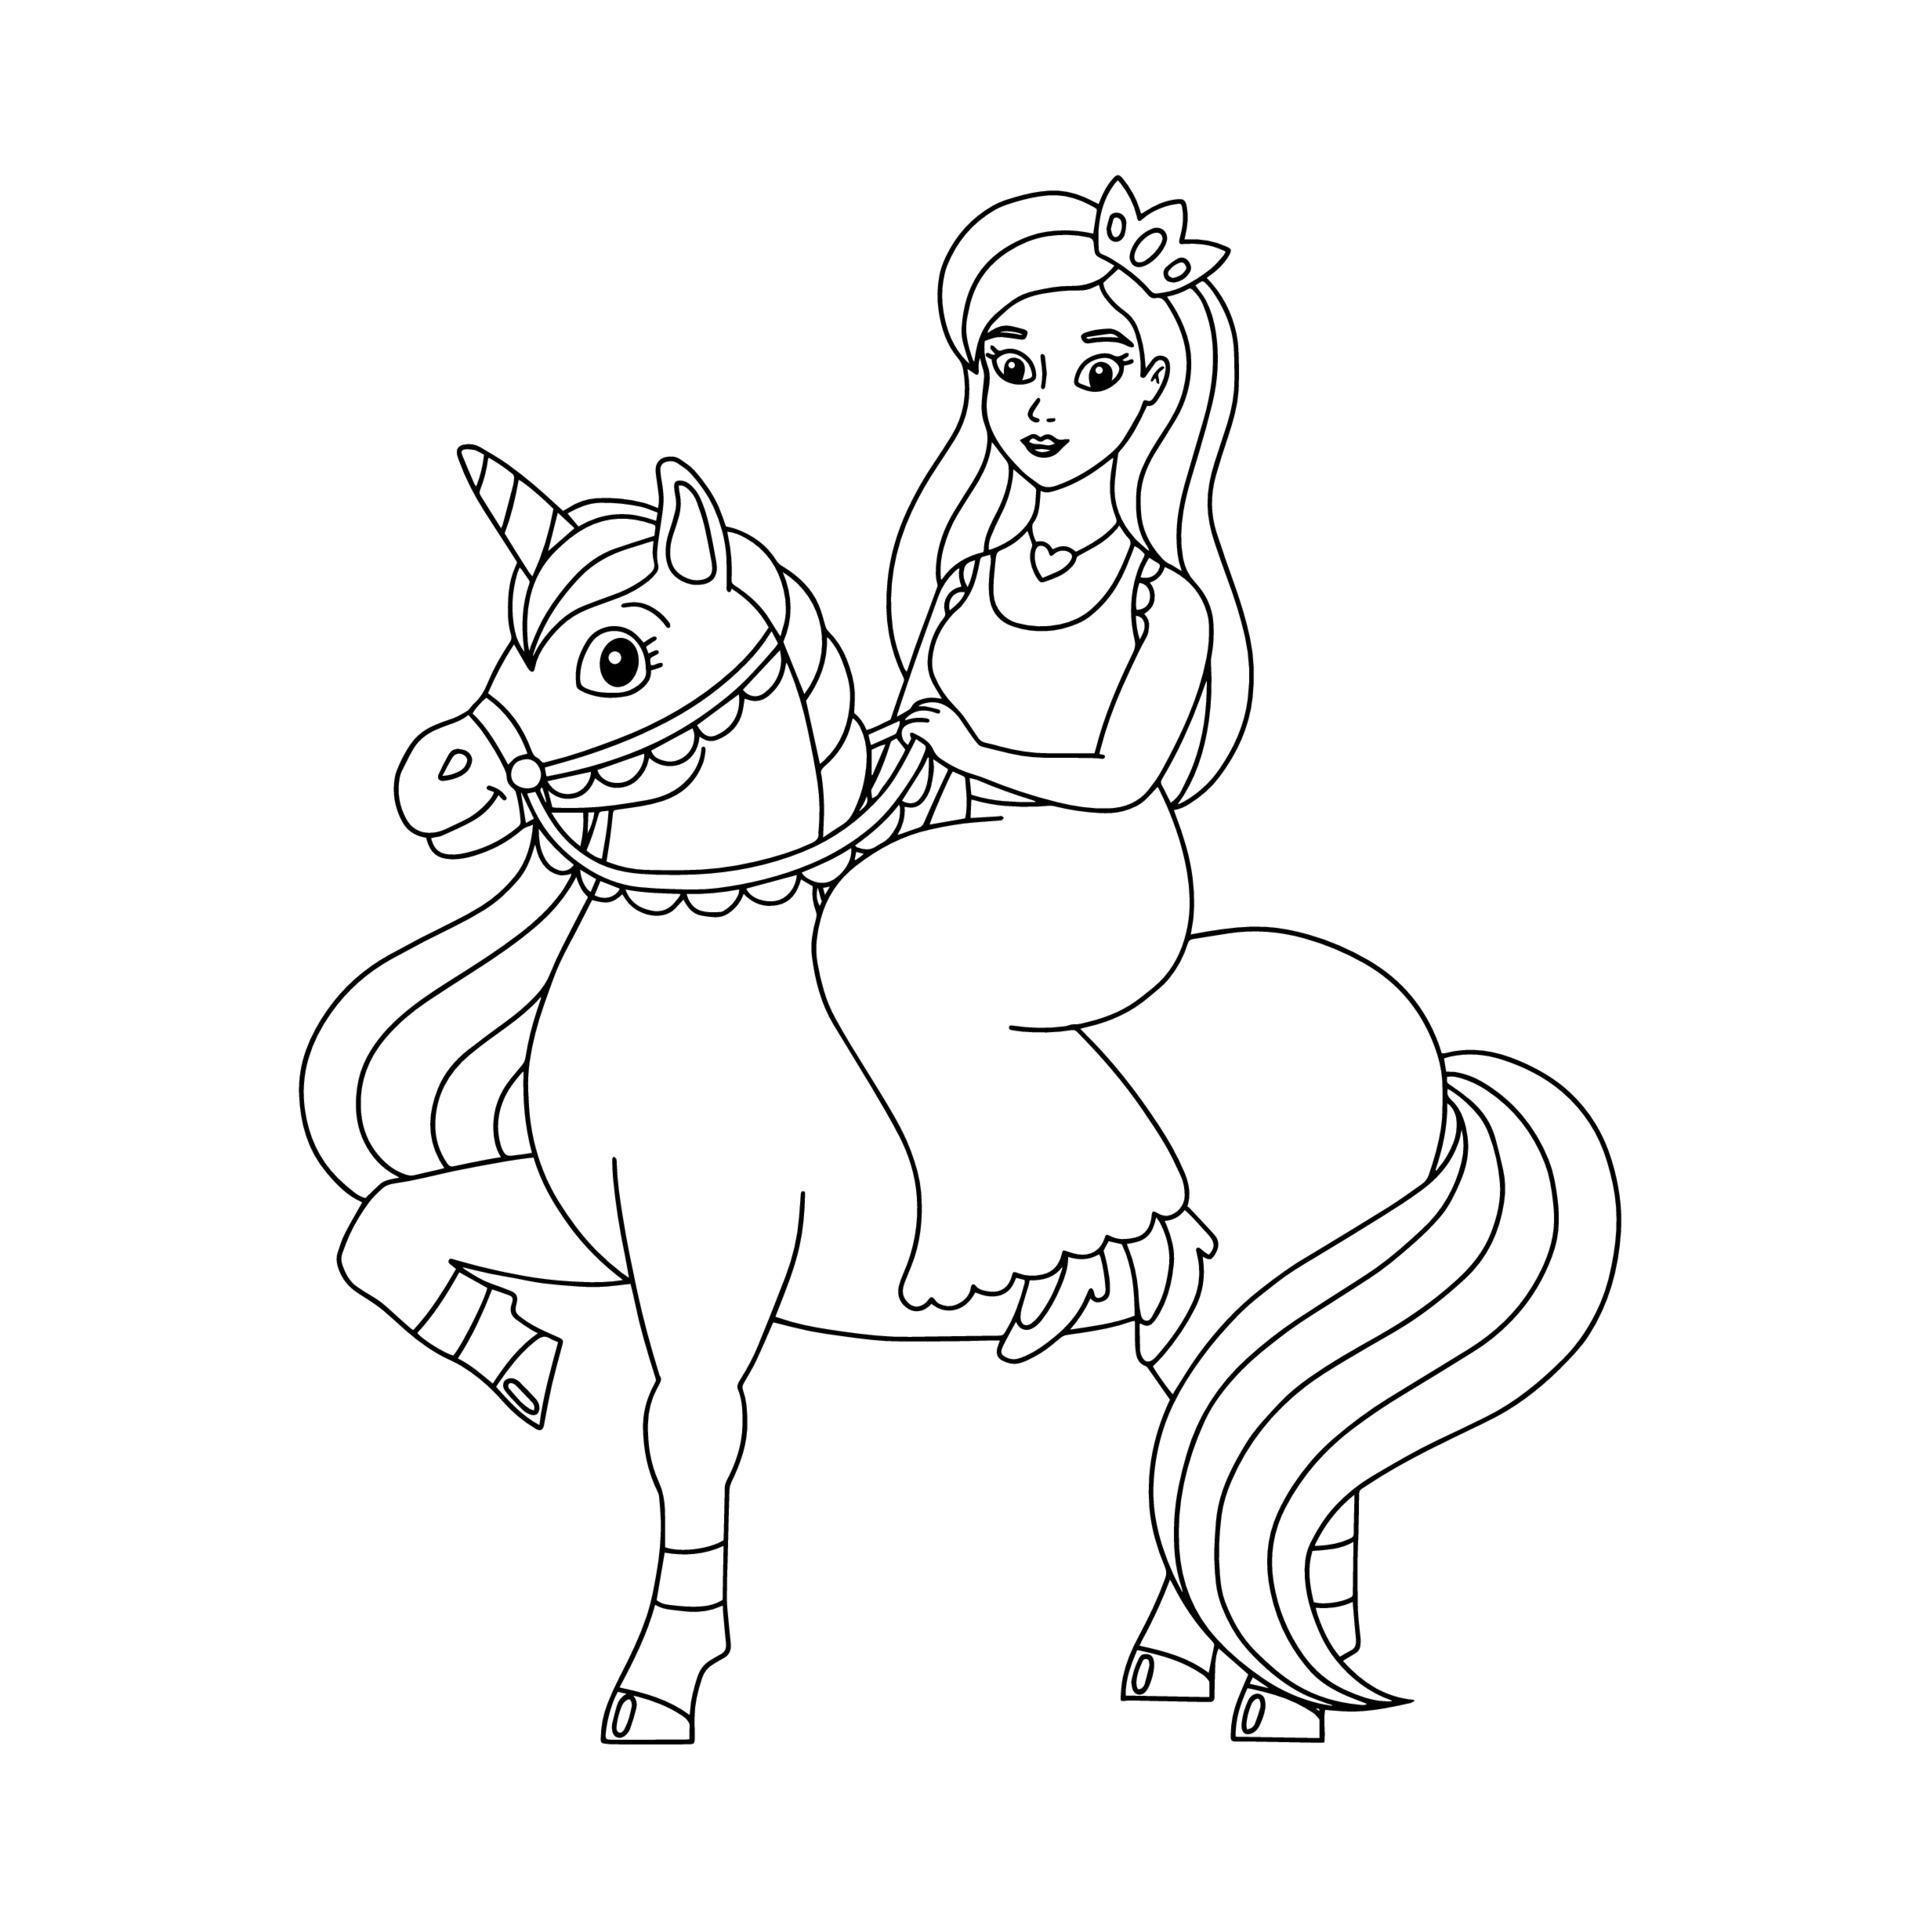 The princess is riding a unicorn. Coloring book page for kids ...